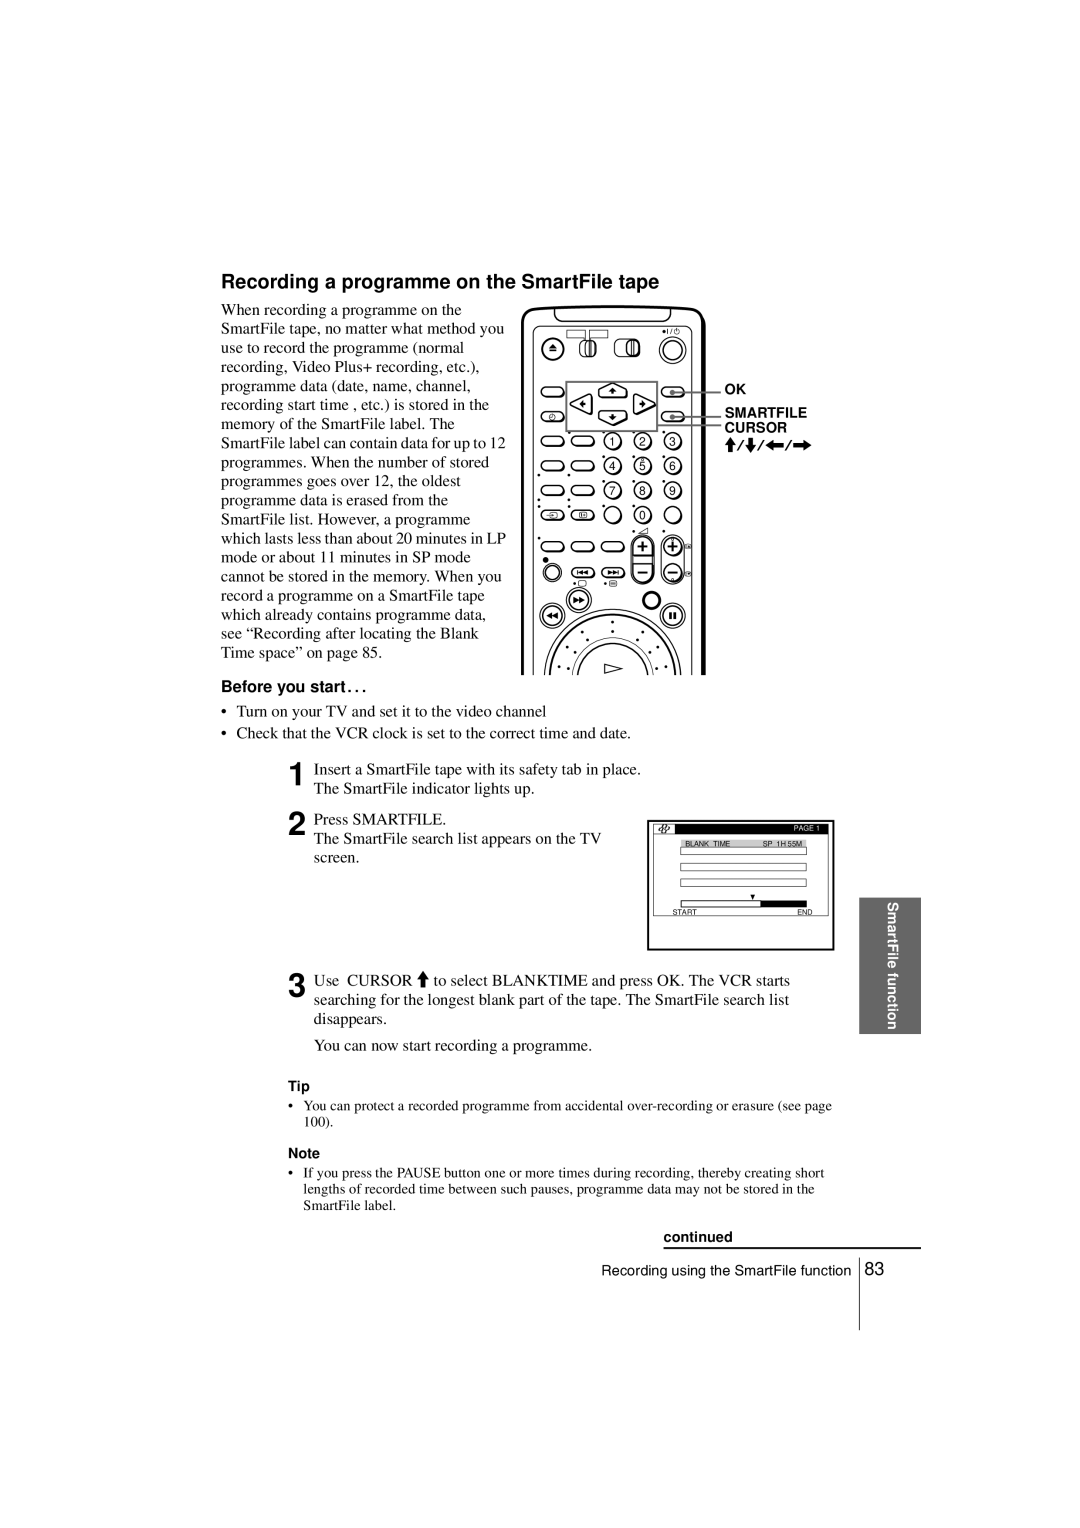 Sony SLV-SF990G manual Recording a programme on the SmartFile tape, Before you start…, function 